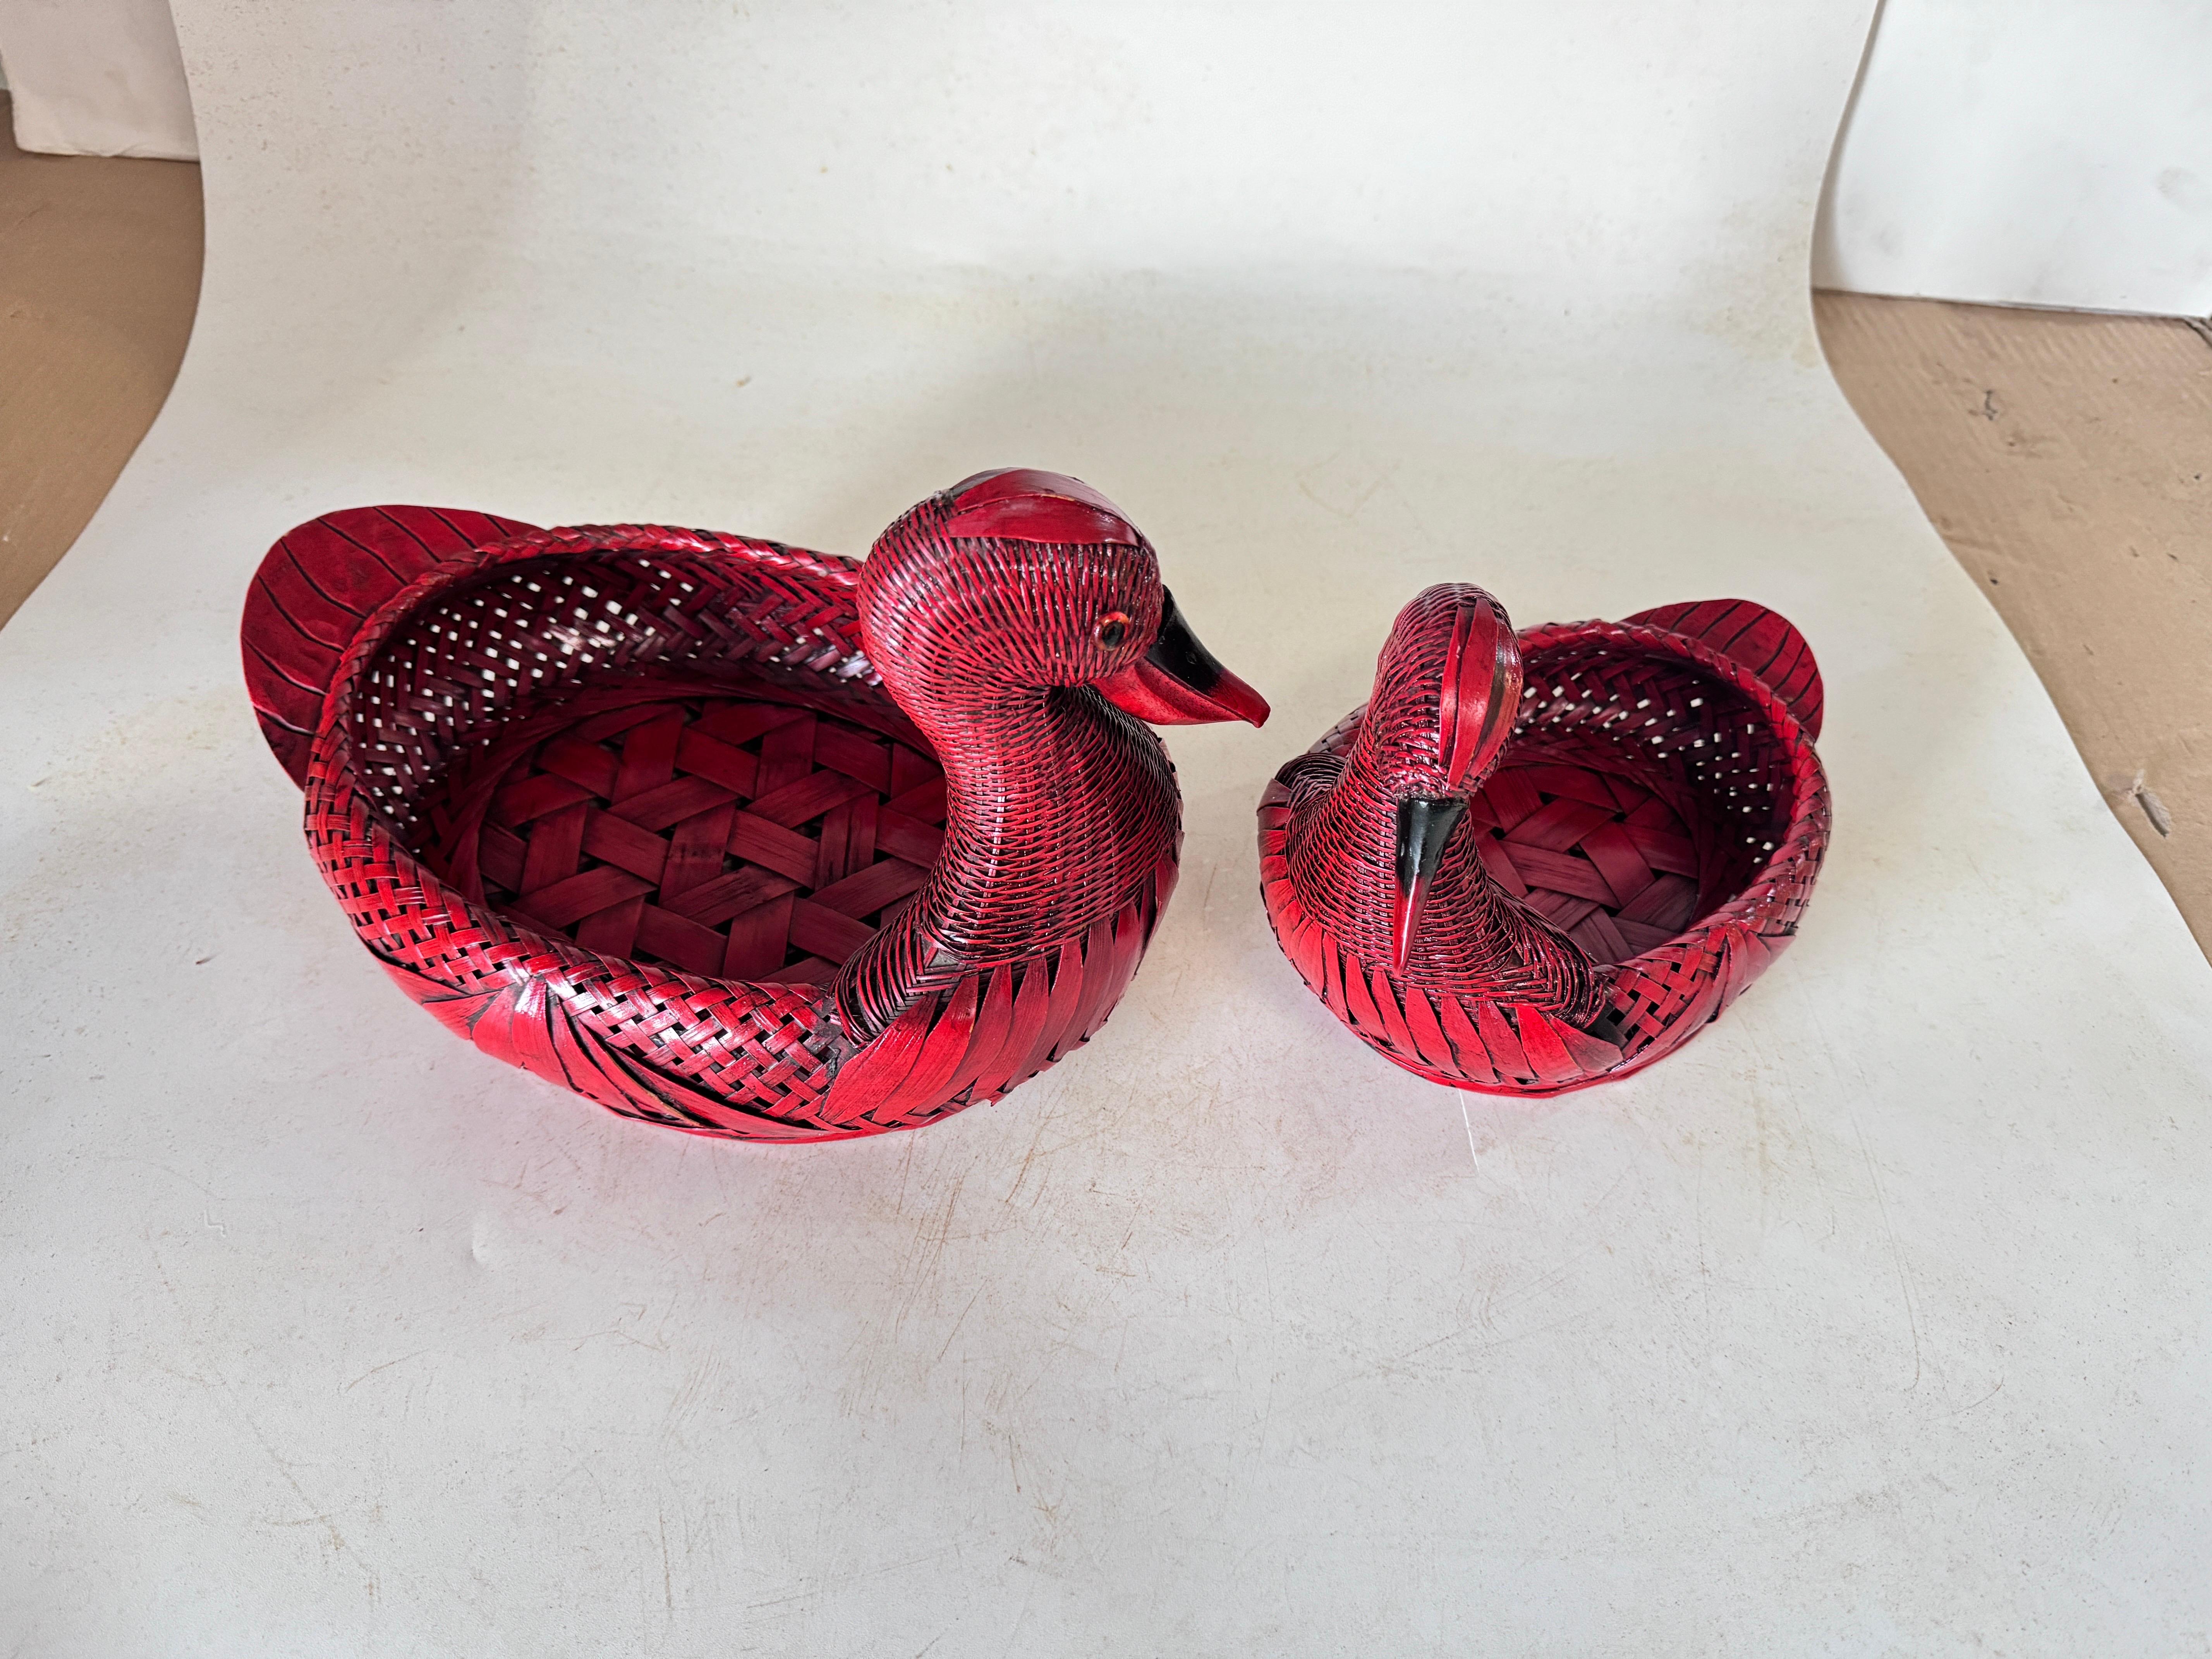 Vide Poches or Decorative Baskets Duck Sculptures Shaped in Rattan Italy 1970s For Sale 1